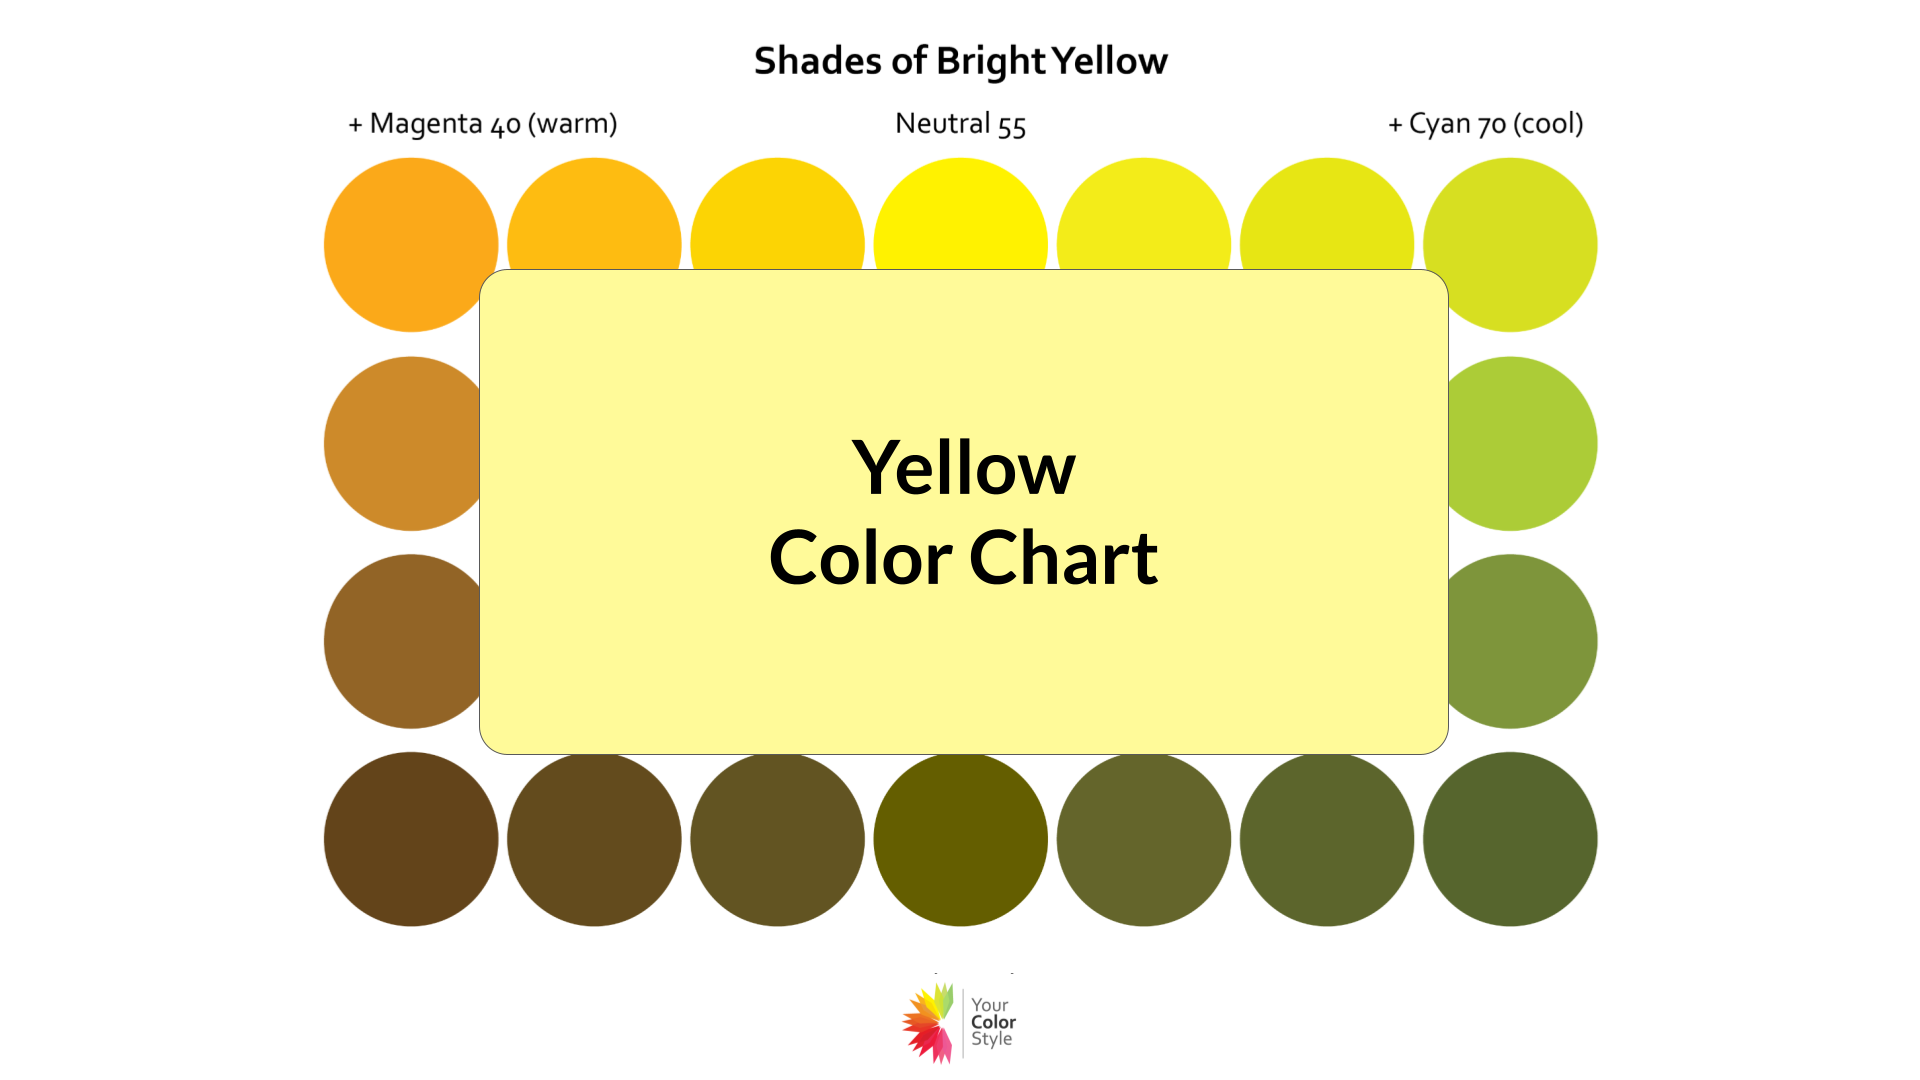 The Full Color Chart of Yellow